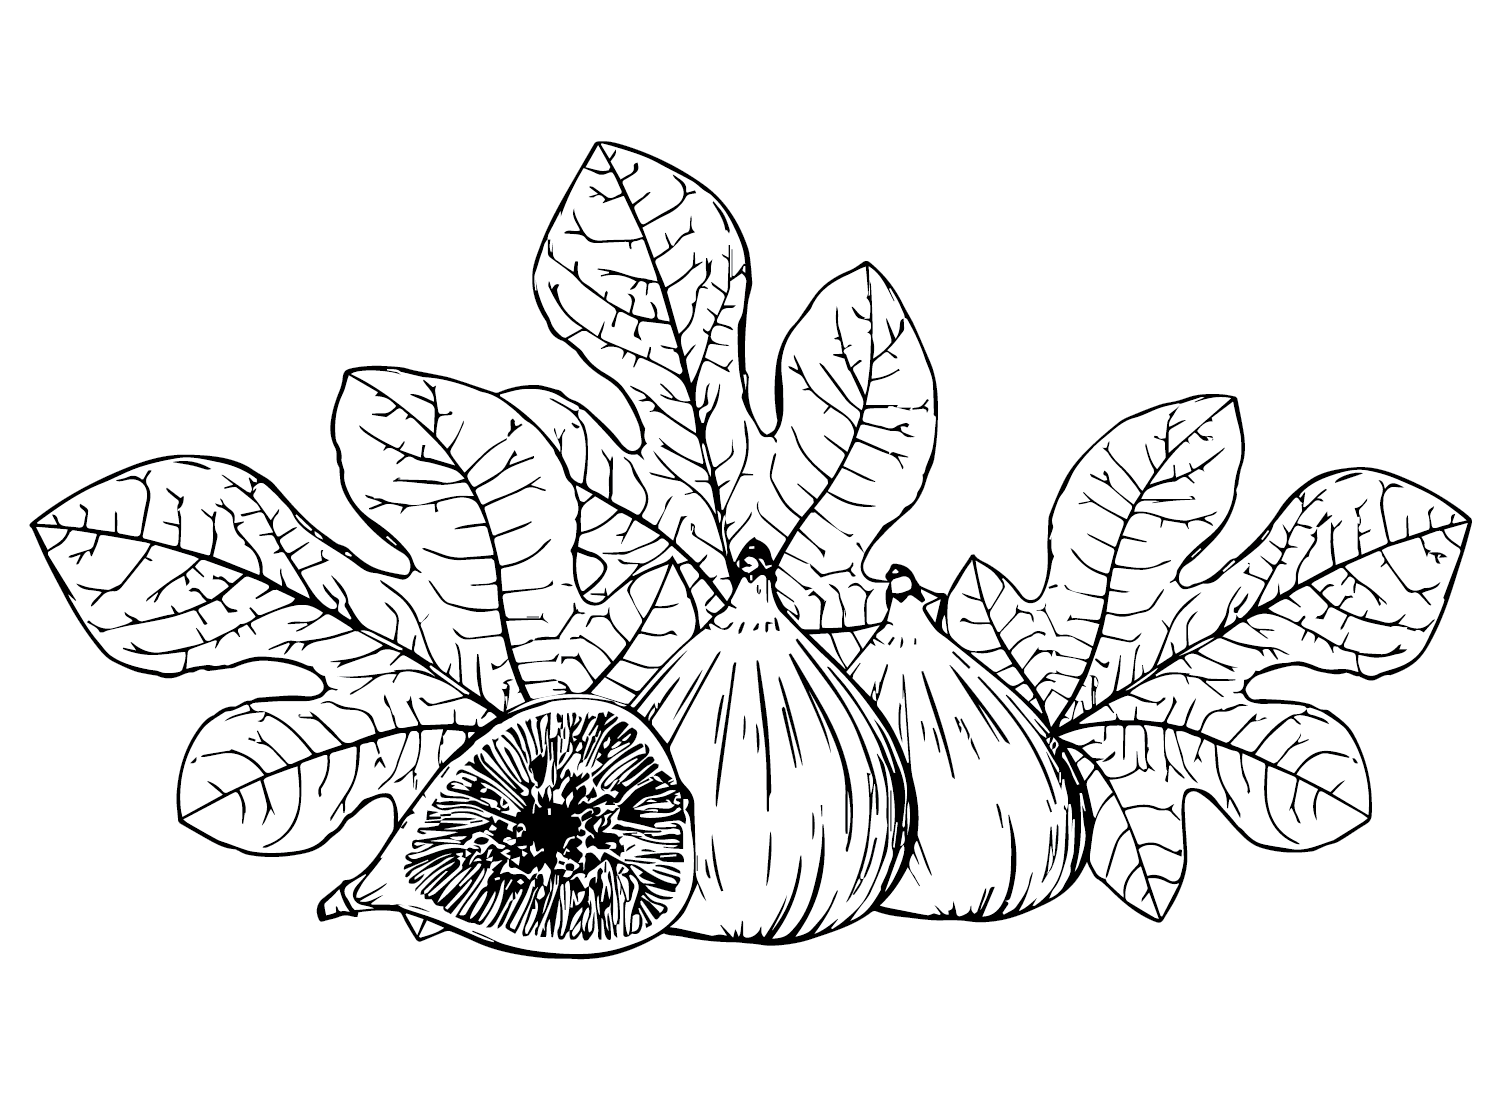 Leaves And Figs Coloring Page Free Printable Coloring Pages